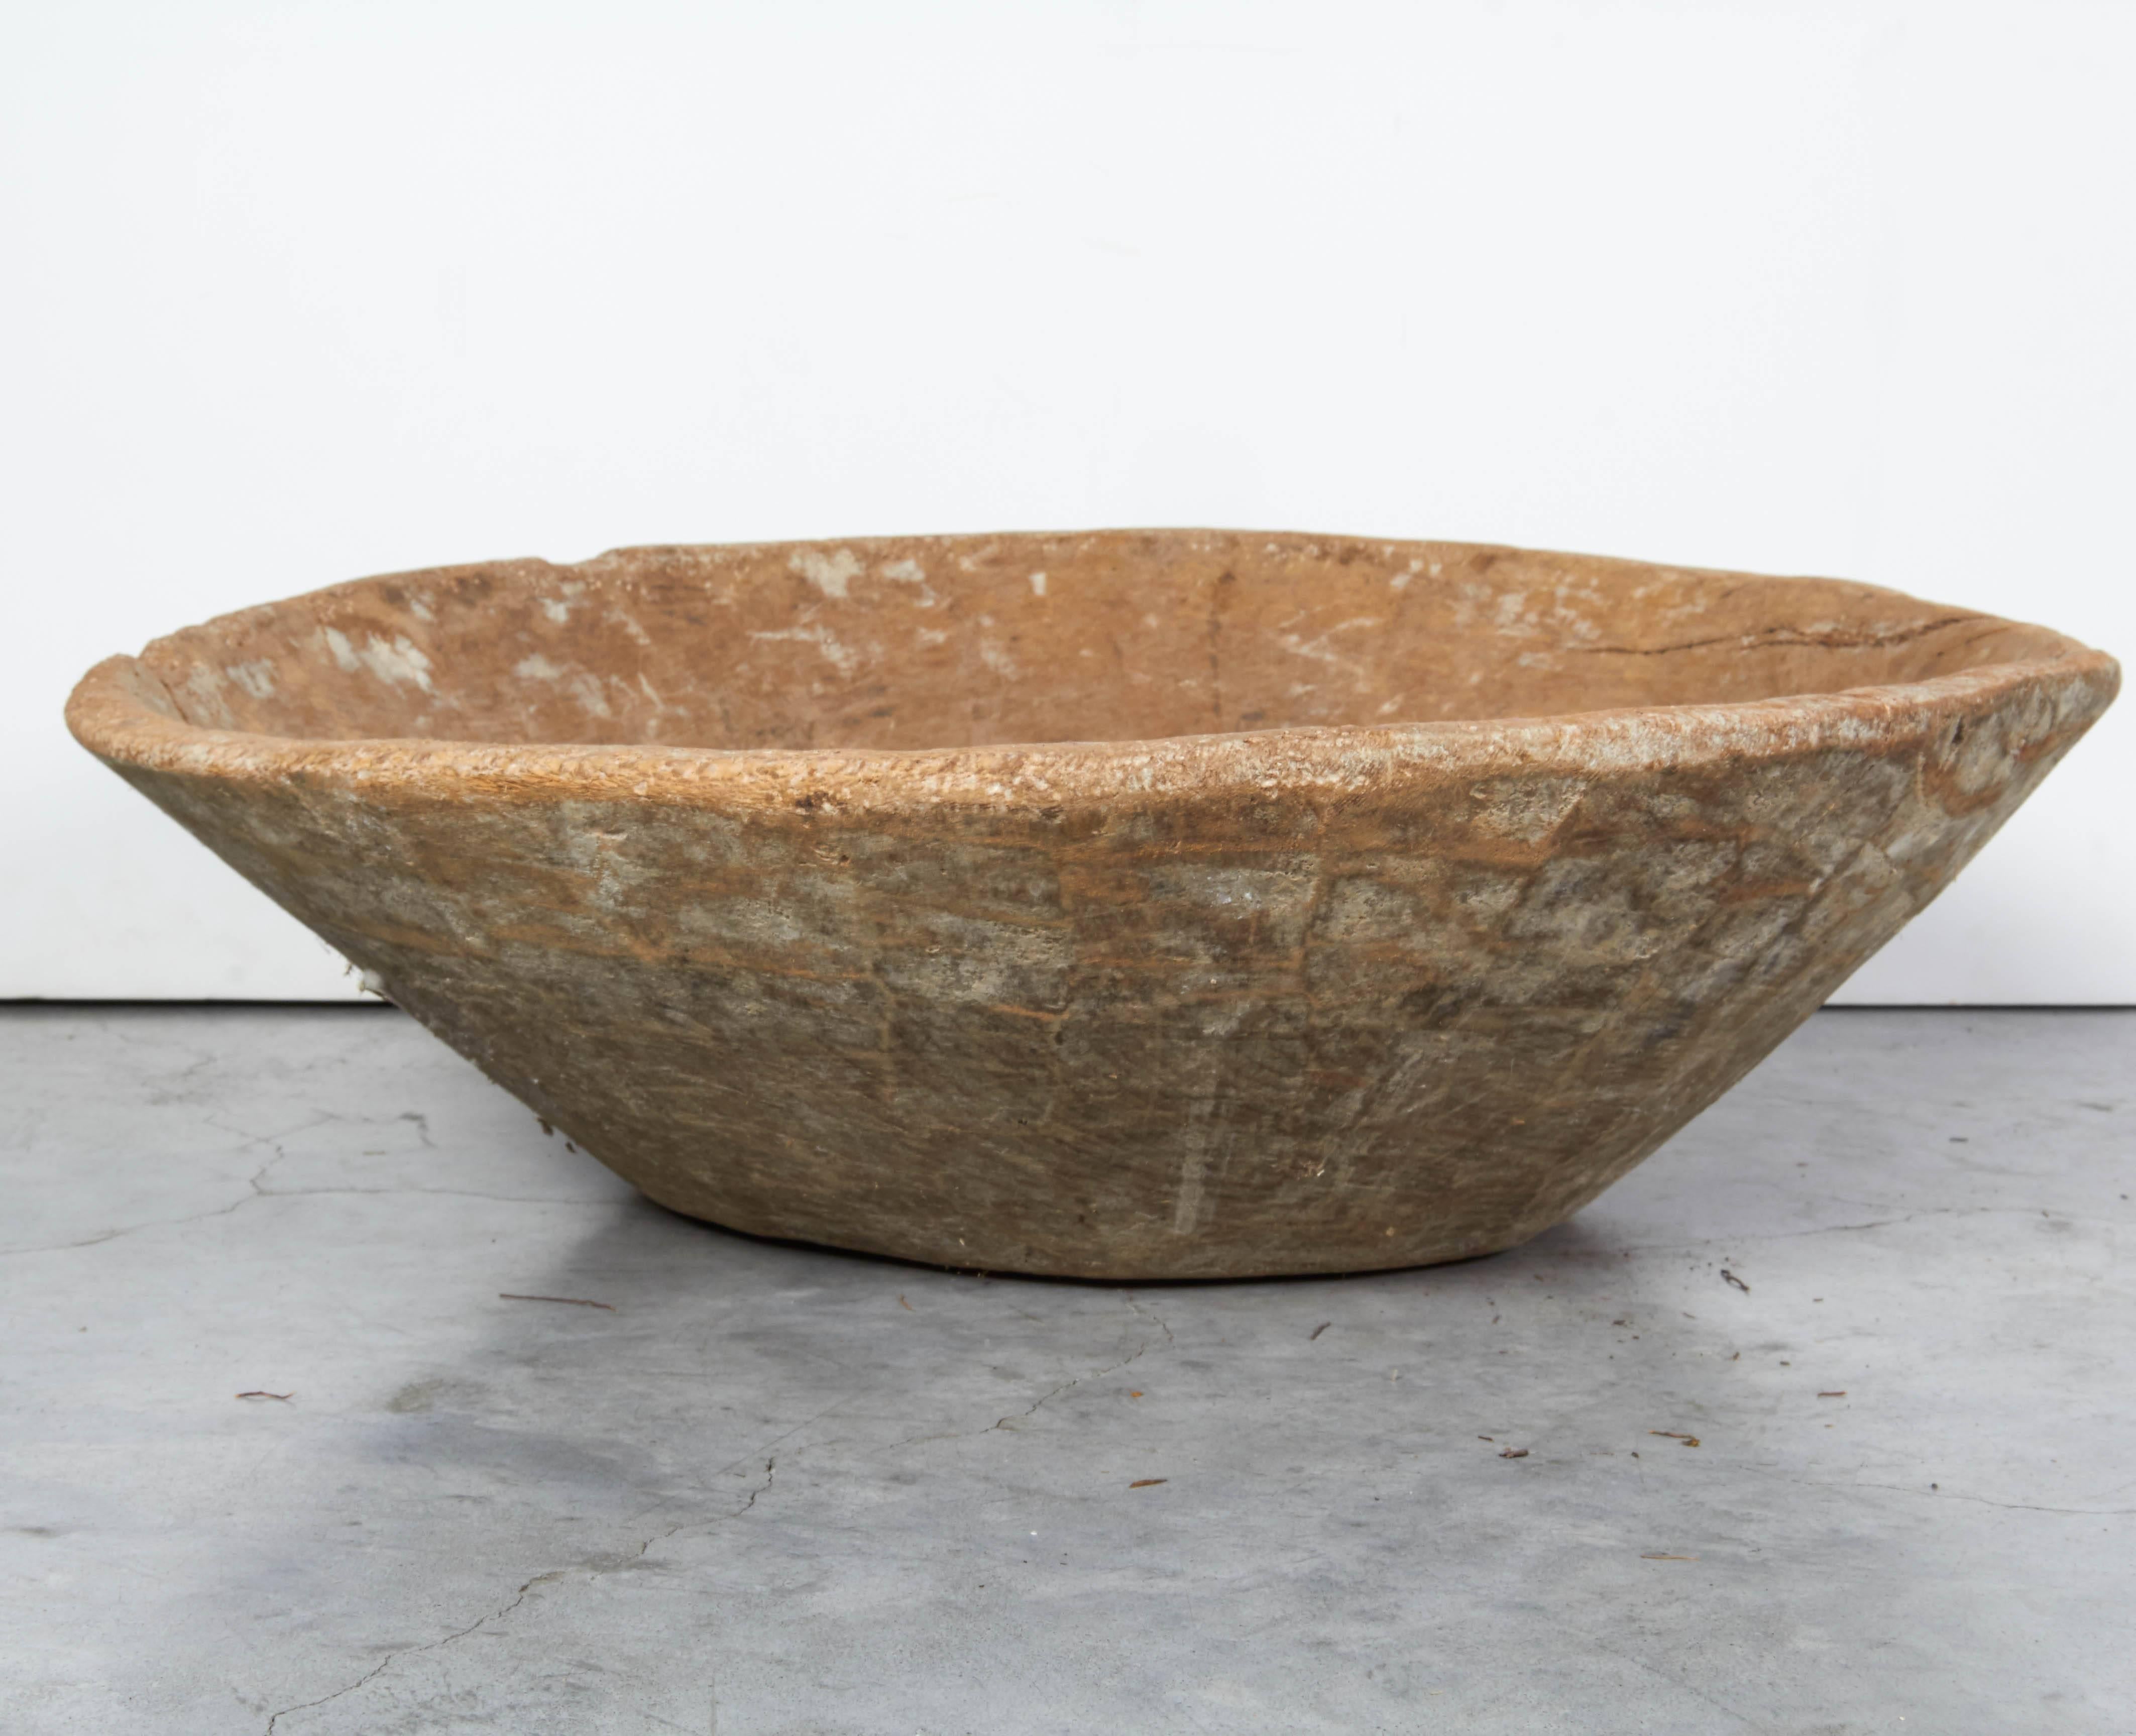 Early 20th Century Antique Work Bowl with Great Wear